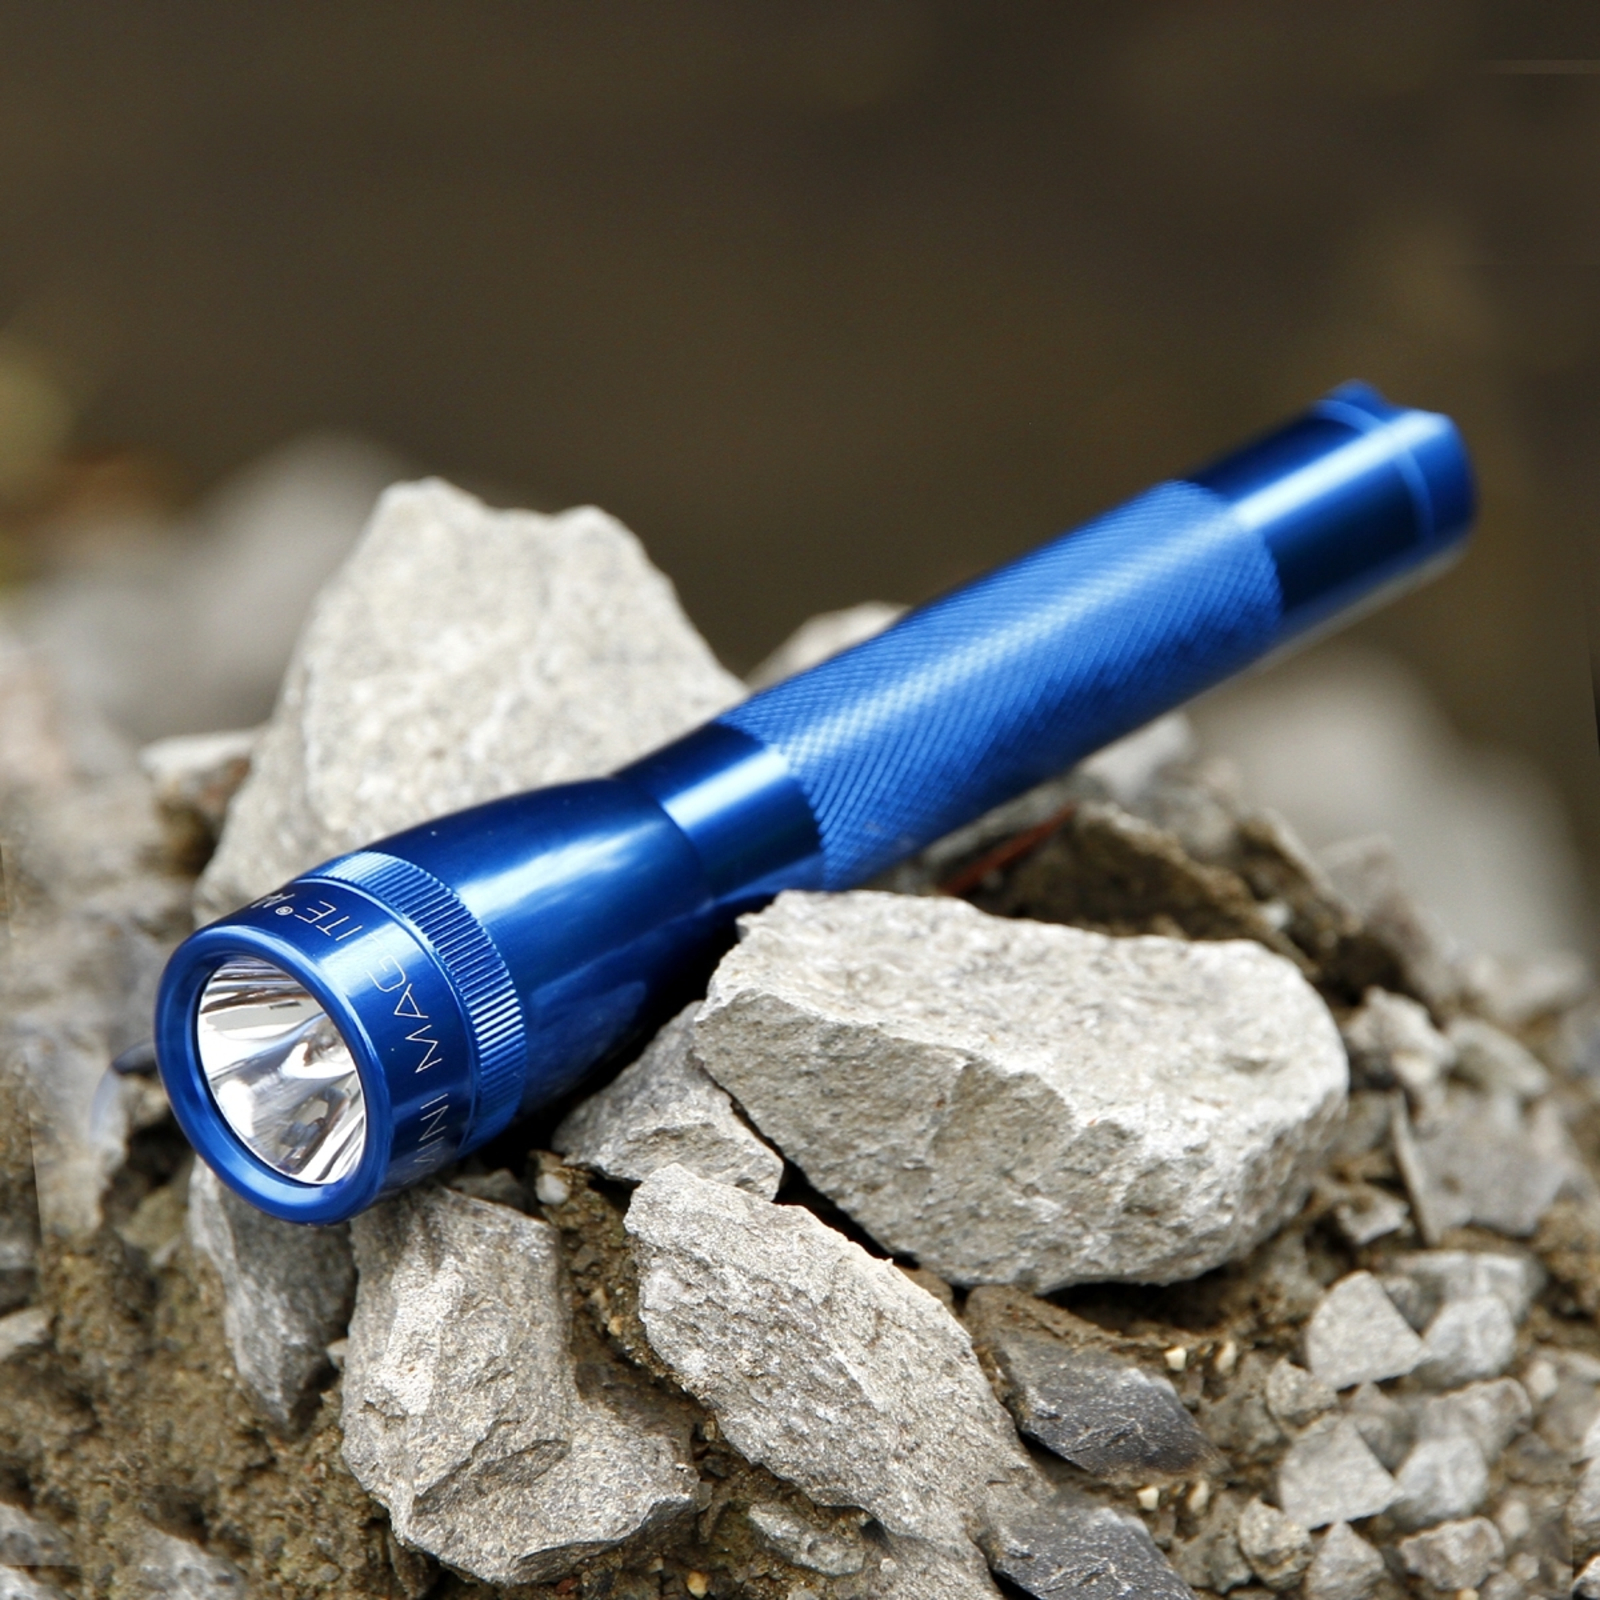 Handy torch Mini-Maglite 2AA cell, blue